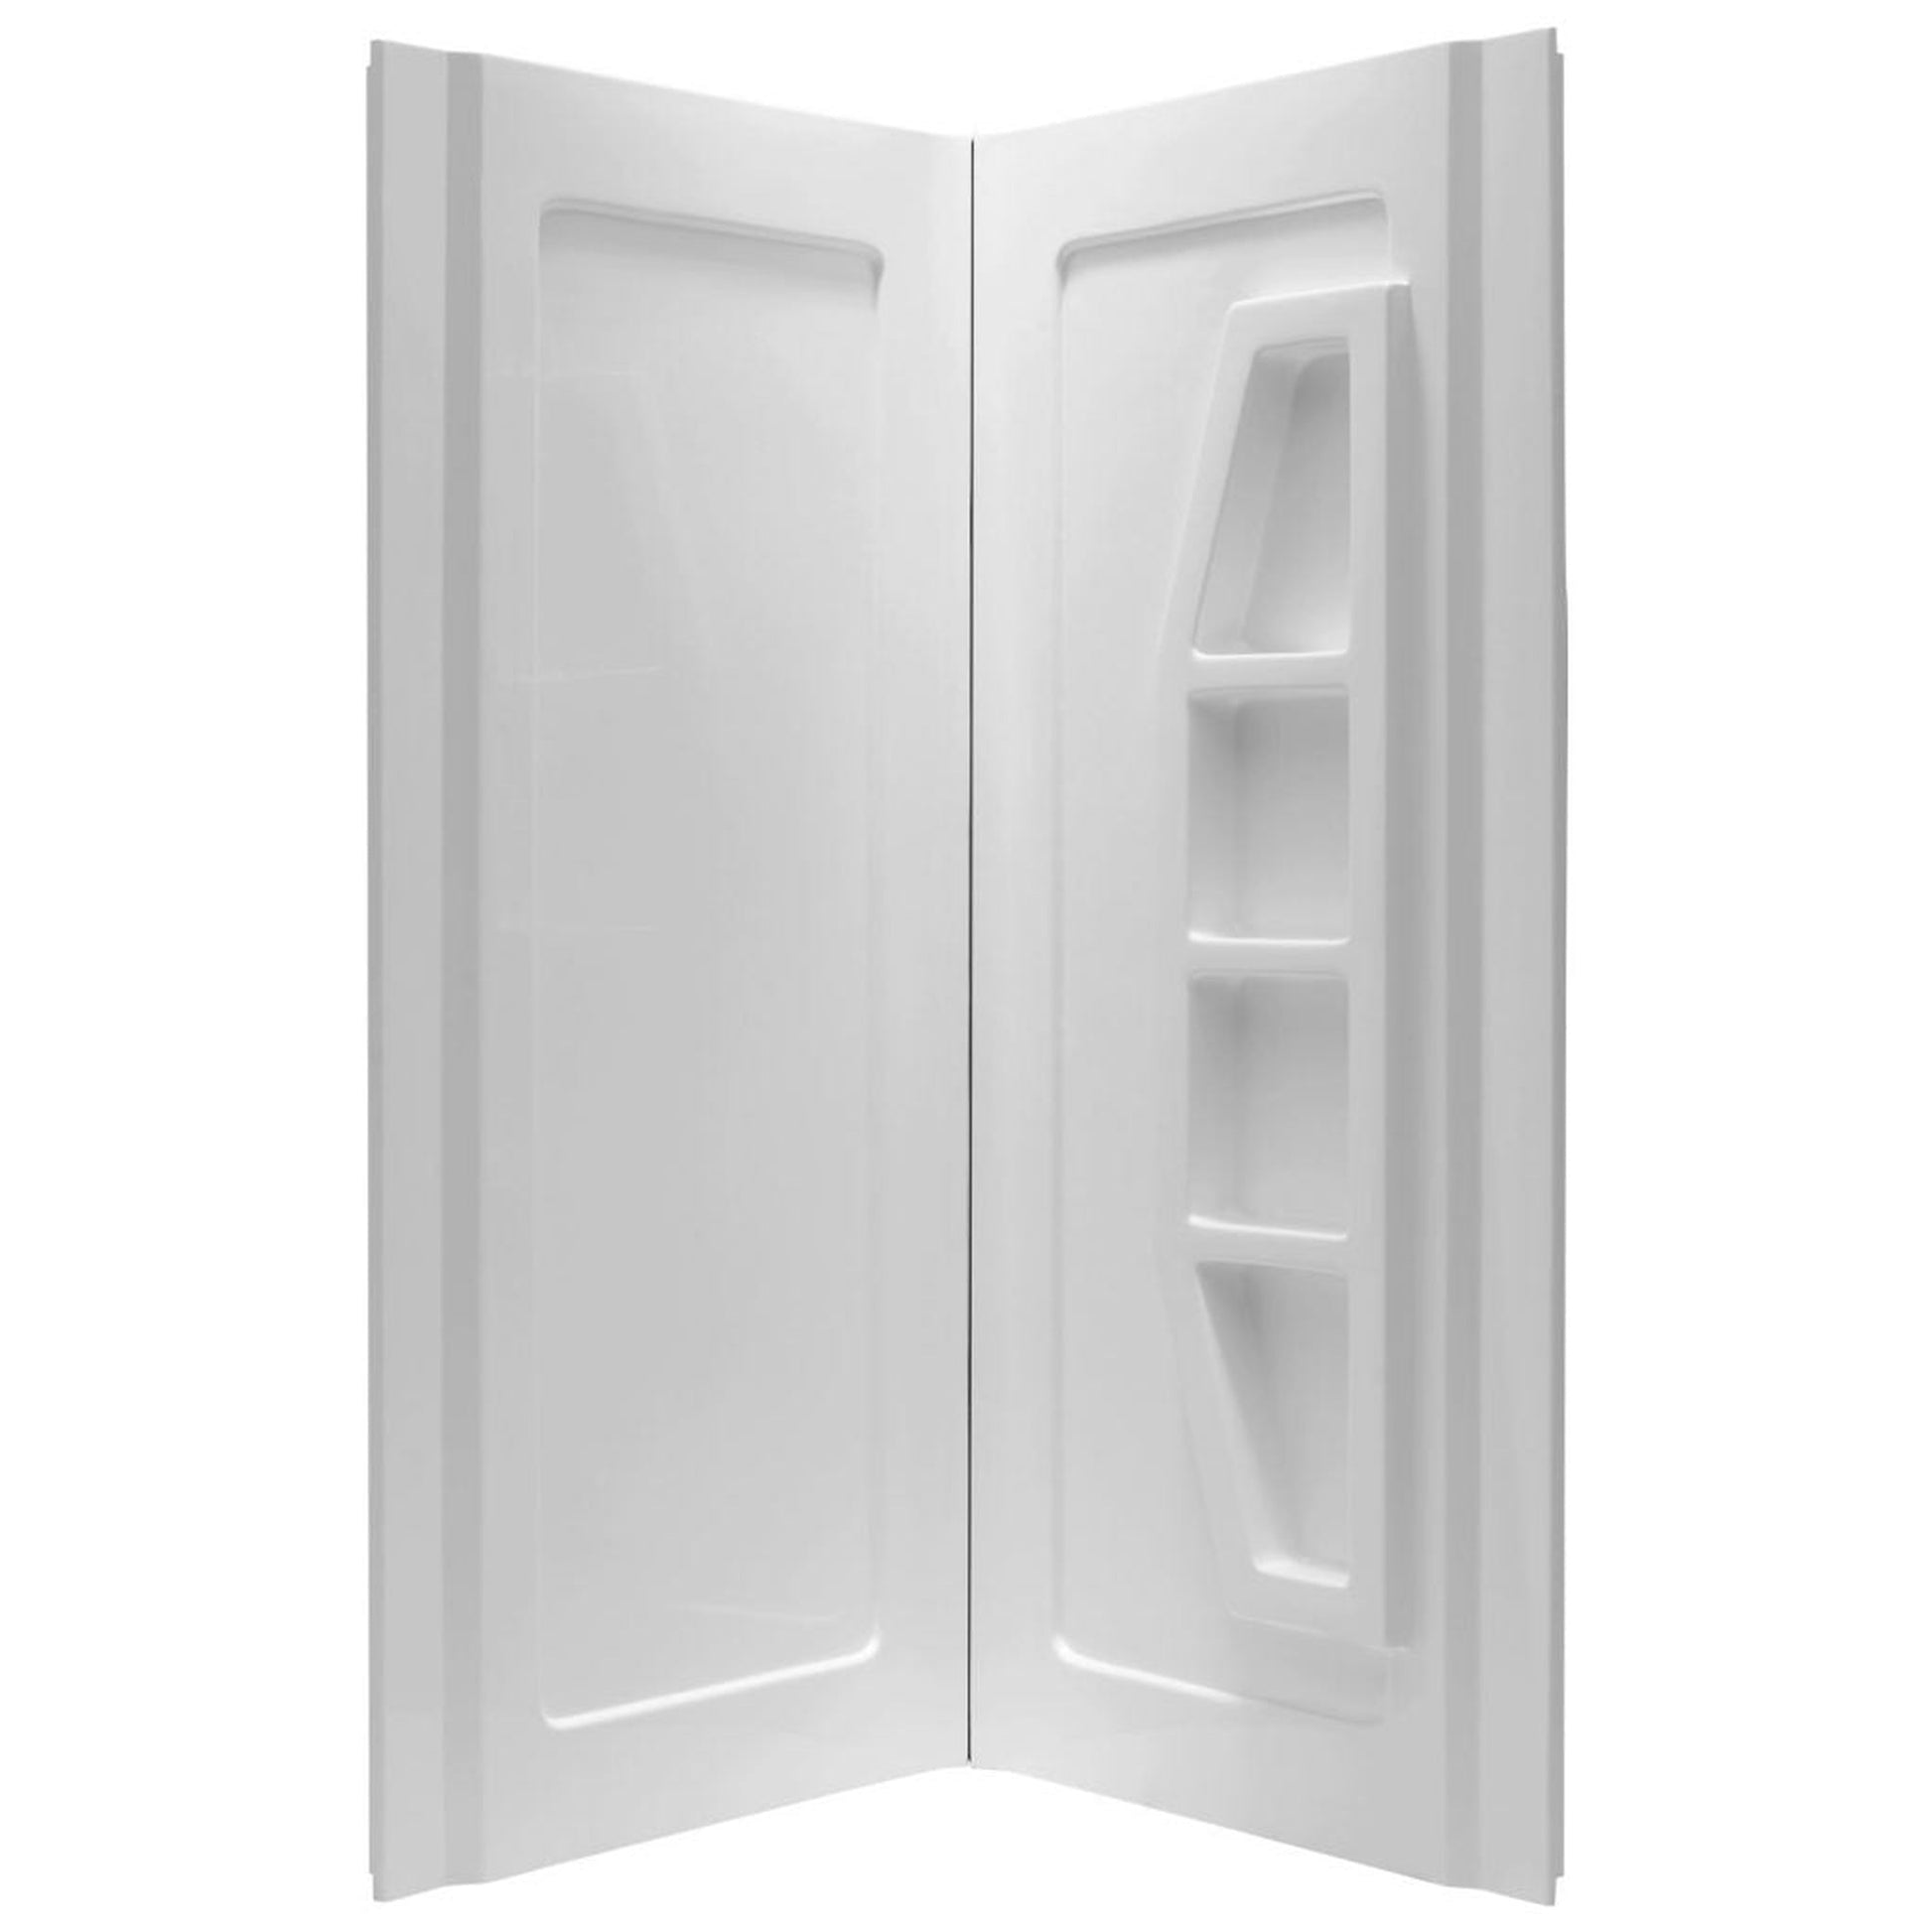 ANZZI Sharman Series 36" x 36" x 74" White Acrylic Corner Two Piece Shower Wall System With 4 Built-in Shelves